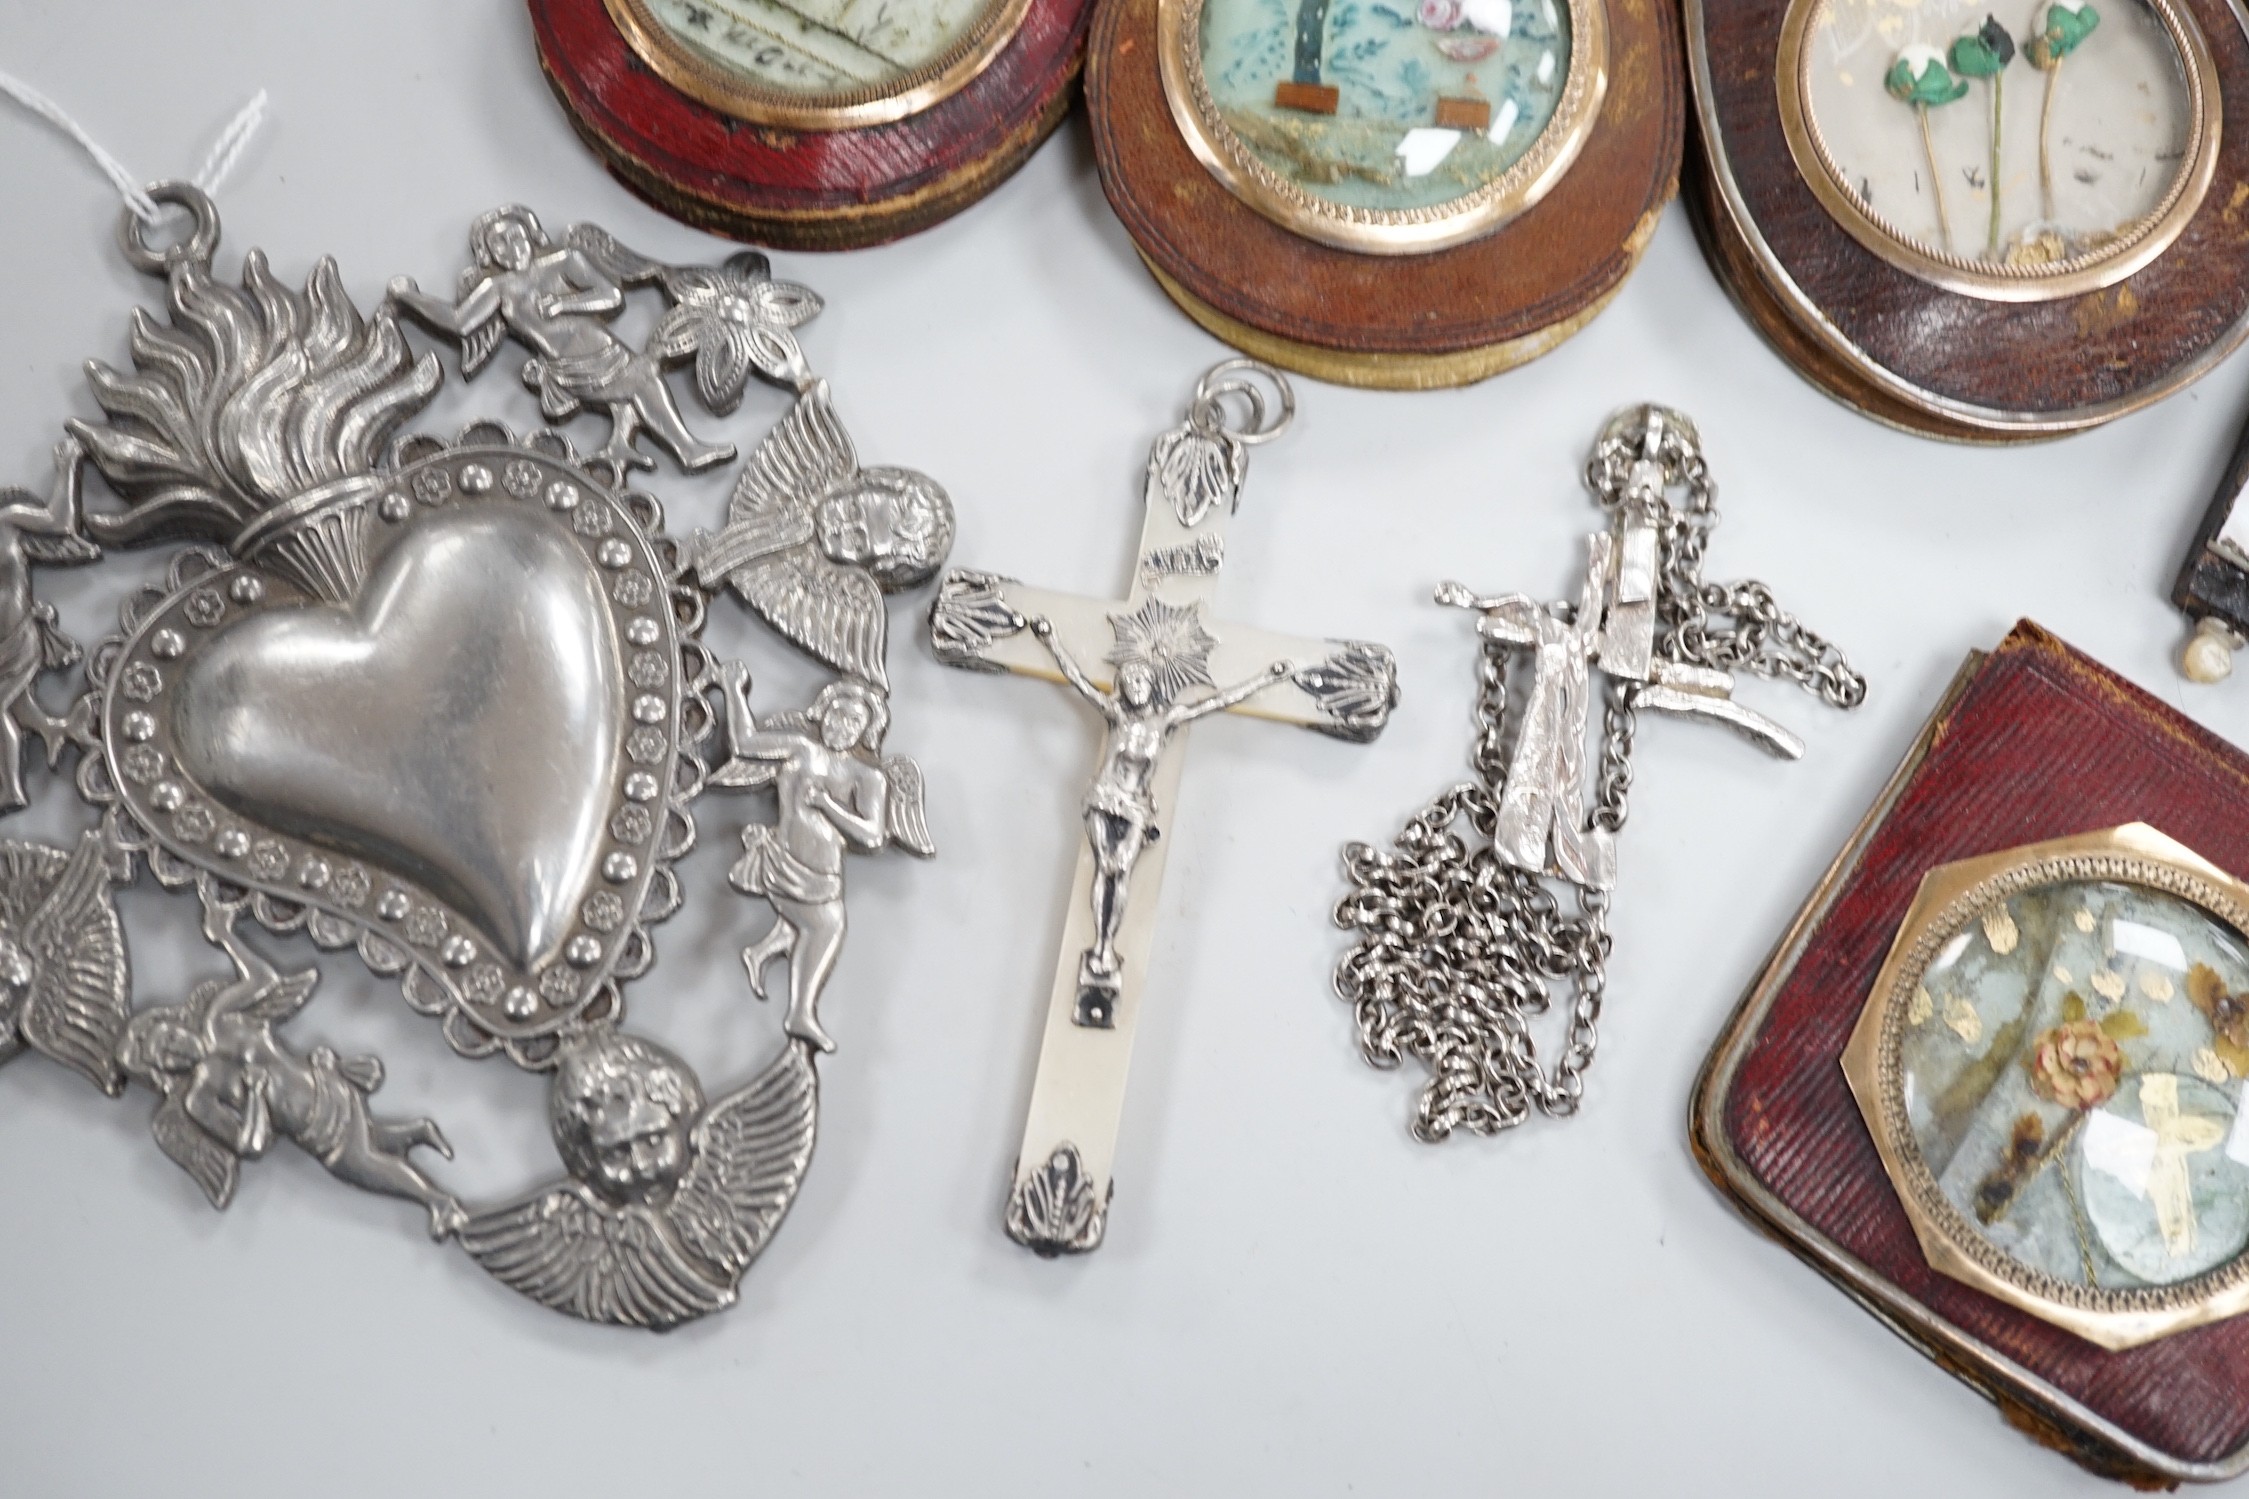 A group of catholic related collectables including Corpus Christi, rosary bead holders etc. - Image 5 of 5